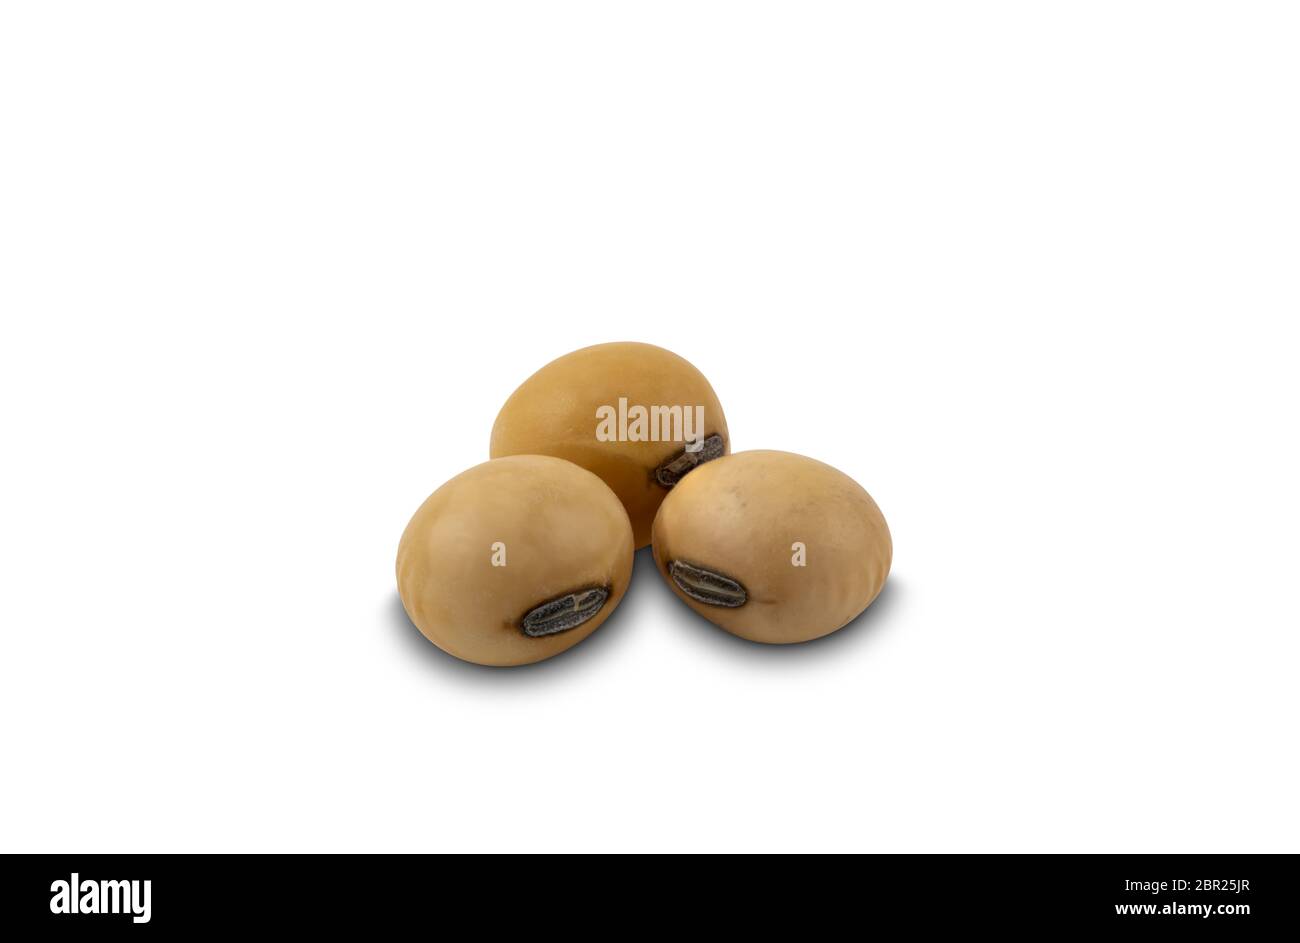 Soy beans on white background with clipping path. Soy bean or Glycine max is a species of legume native to East Asia. Stock Photo